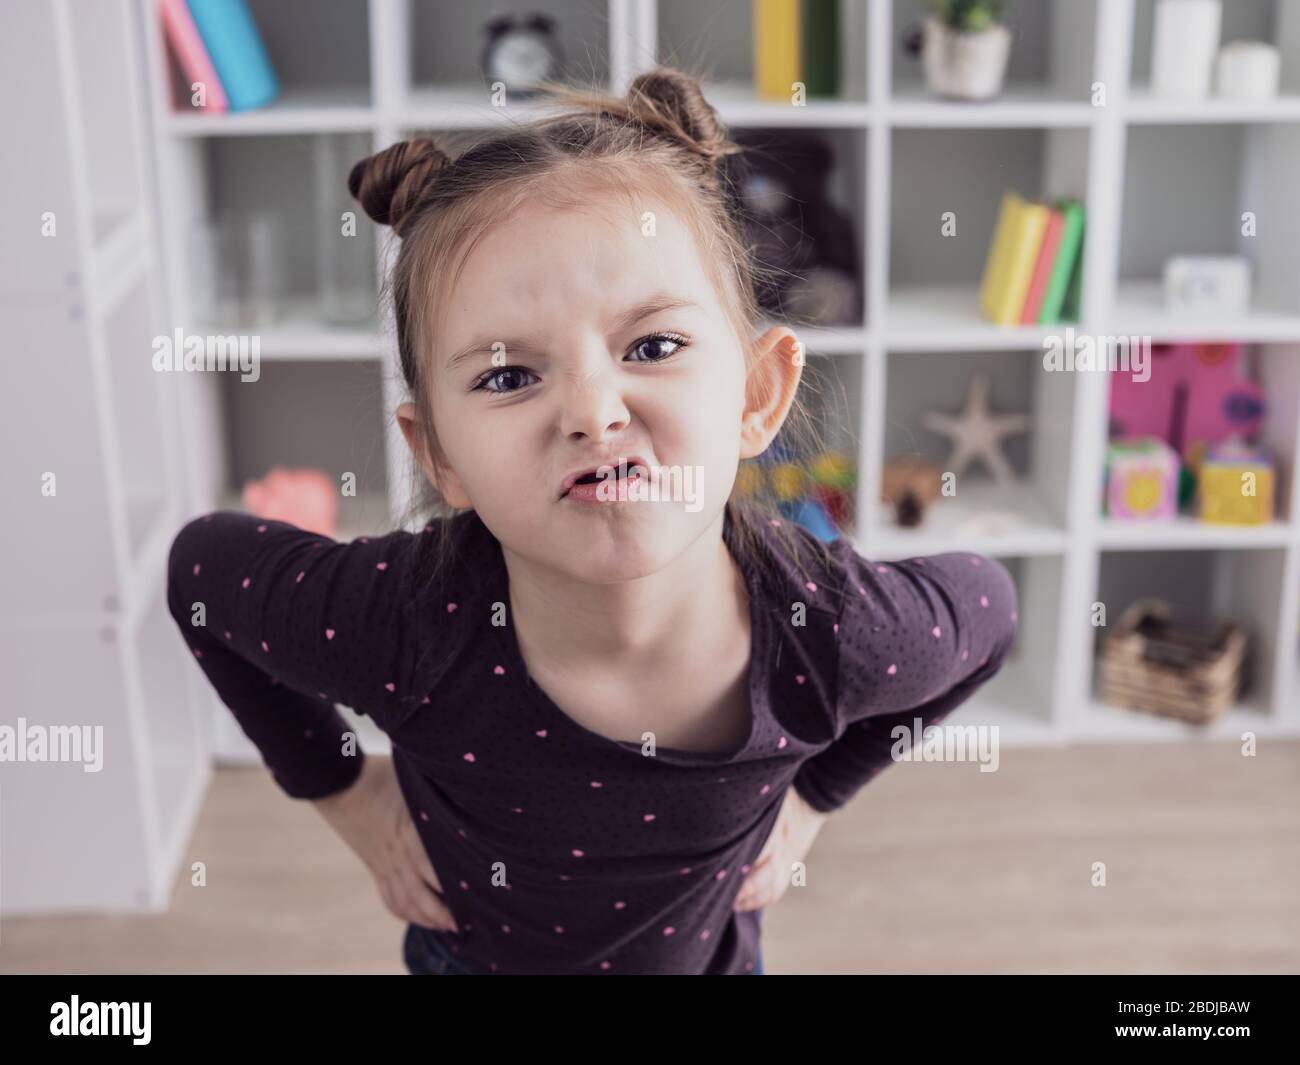 Close up portrait of little child girl with funny face expression. Stock Photo